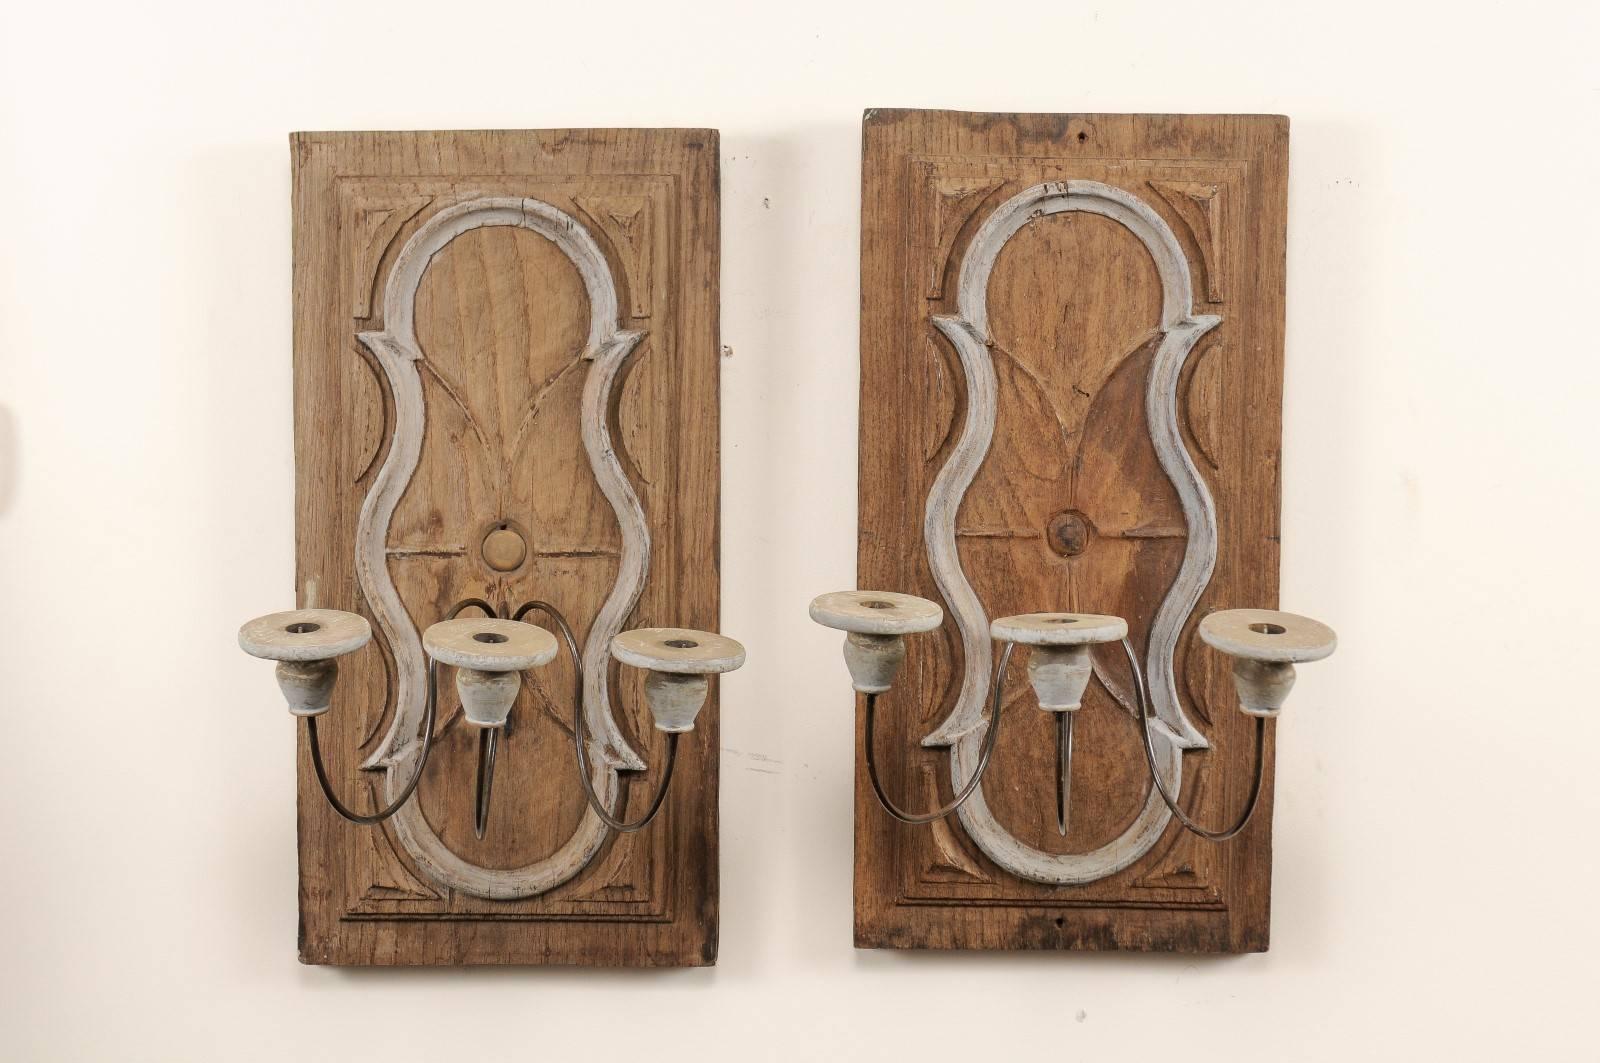 A pair of Italian 19th century carved wooden plaque sconces. This pair of Italian candle sconces have been fashioned from 19th carved wood wall plaques with 20th century arms. The carved wood back plates are vertical rectangular-shapes with fluid